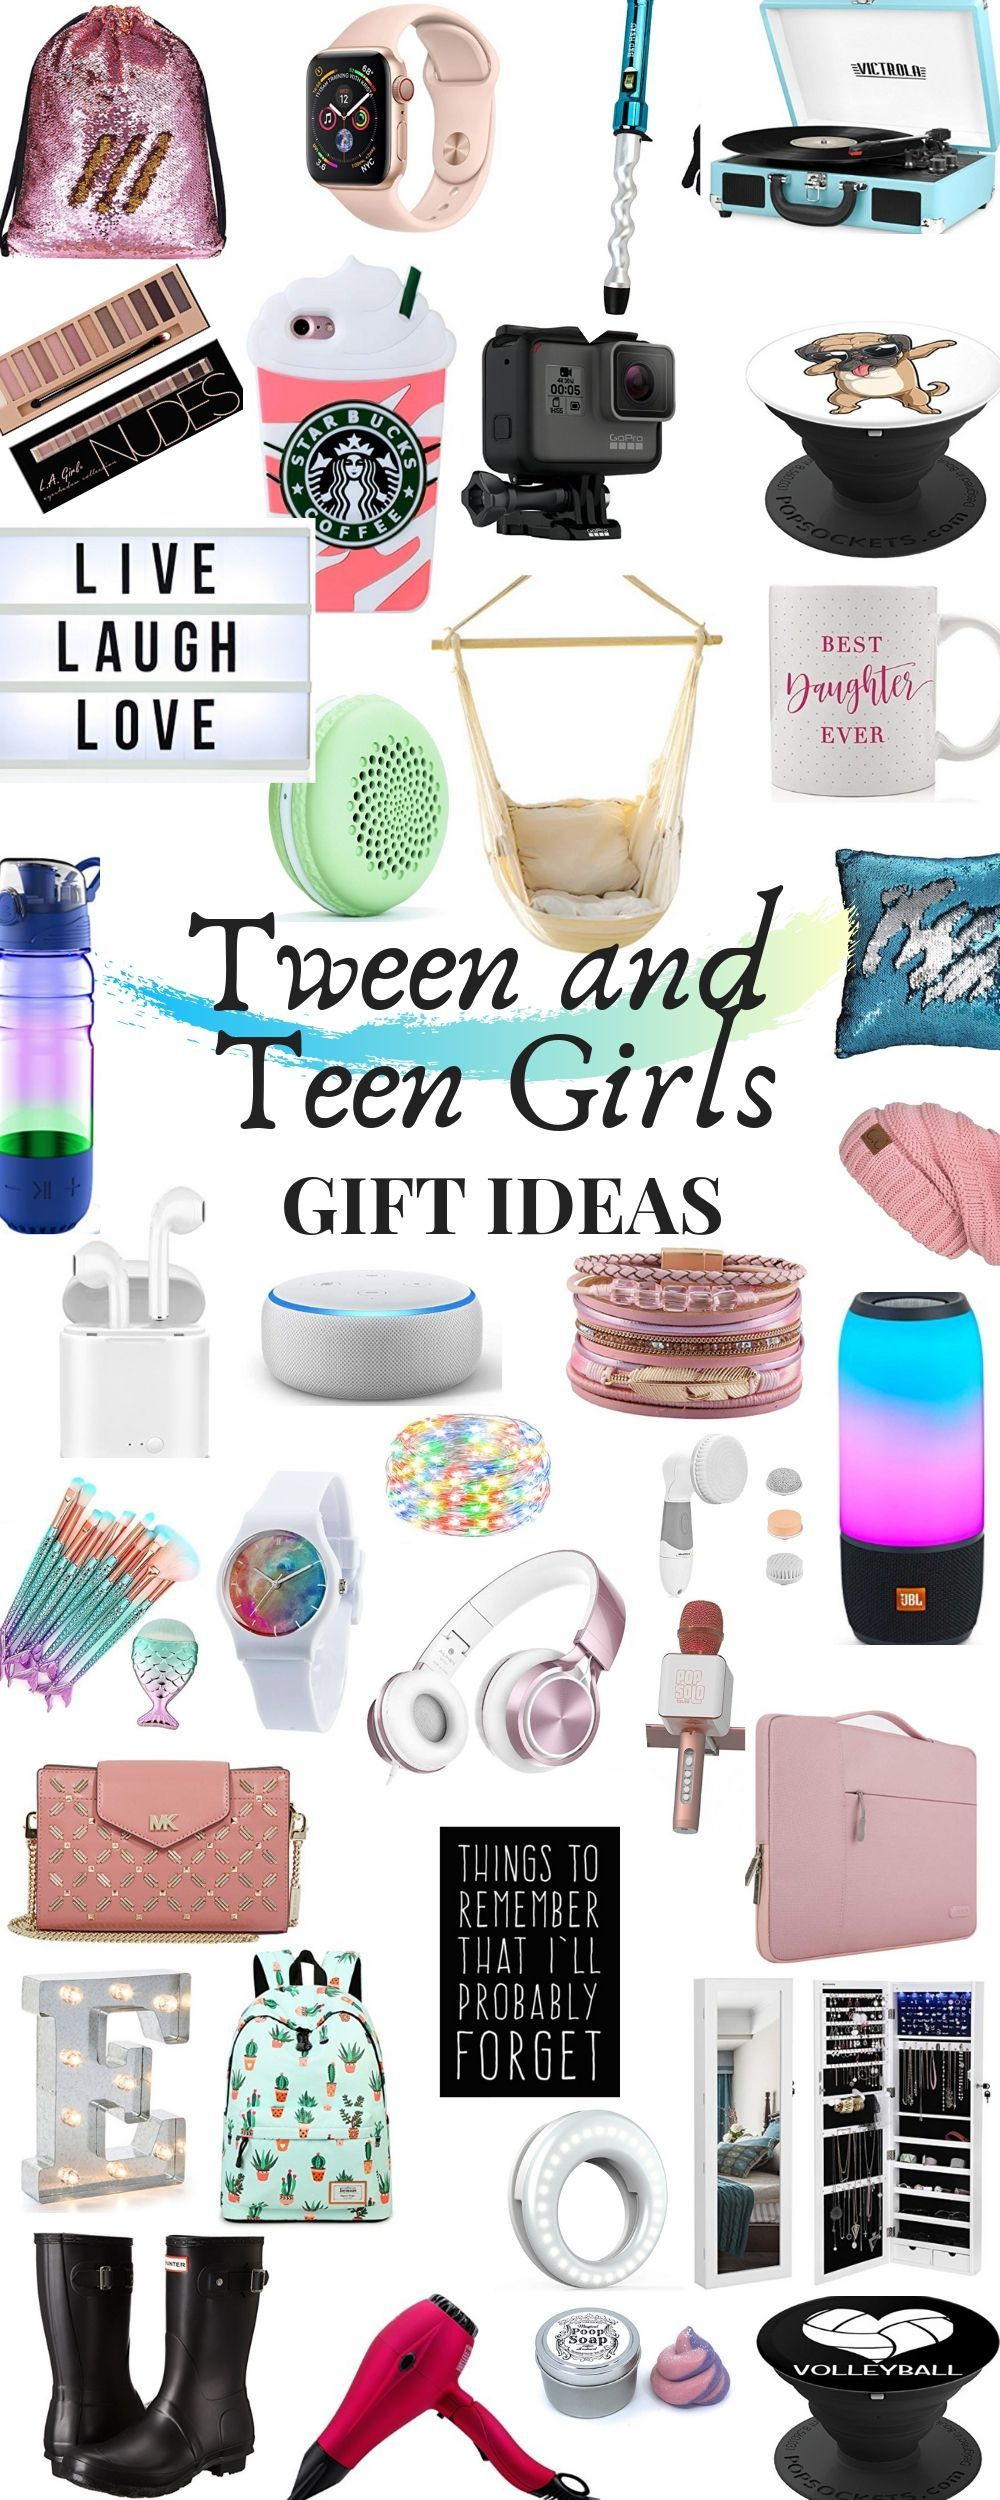 Teenage Girlfriend Gift Ideas
 Pin on Gift Ideas for Teenagers